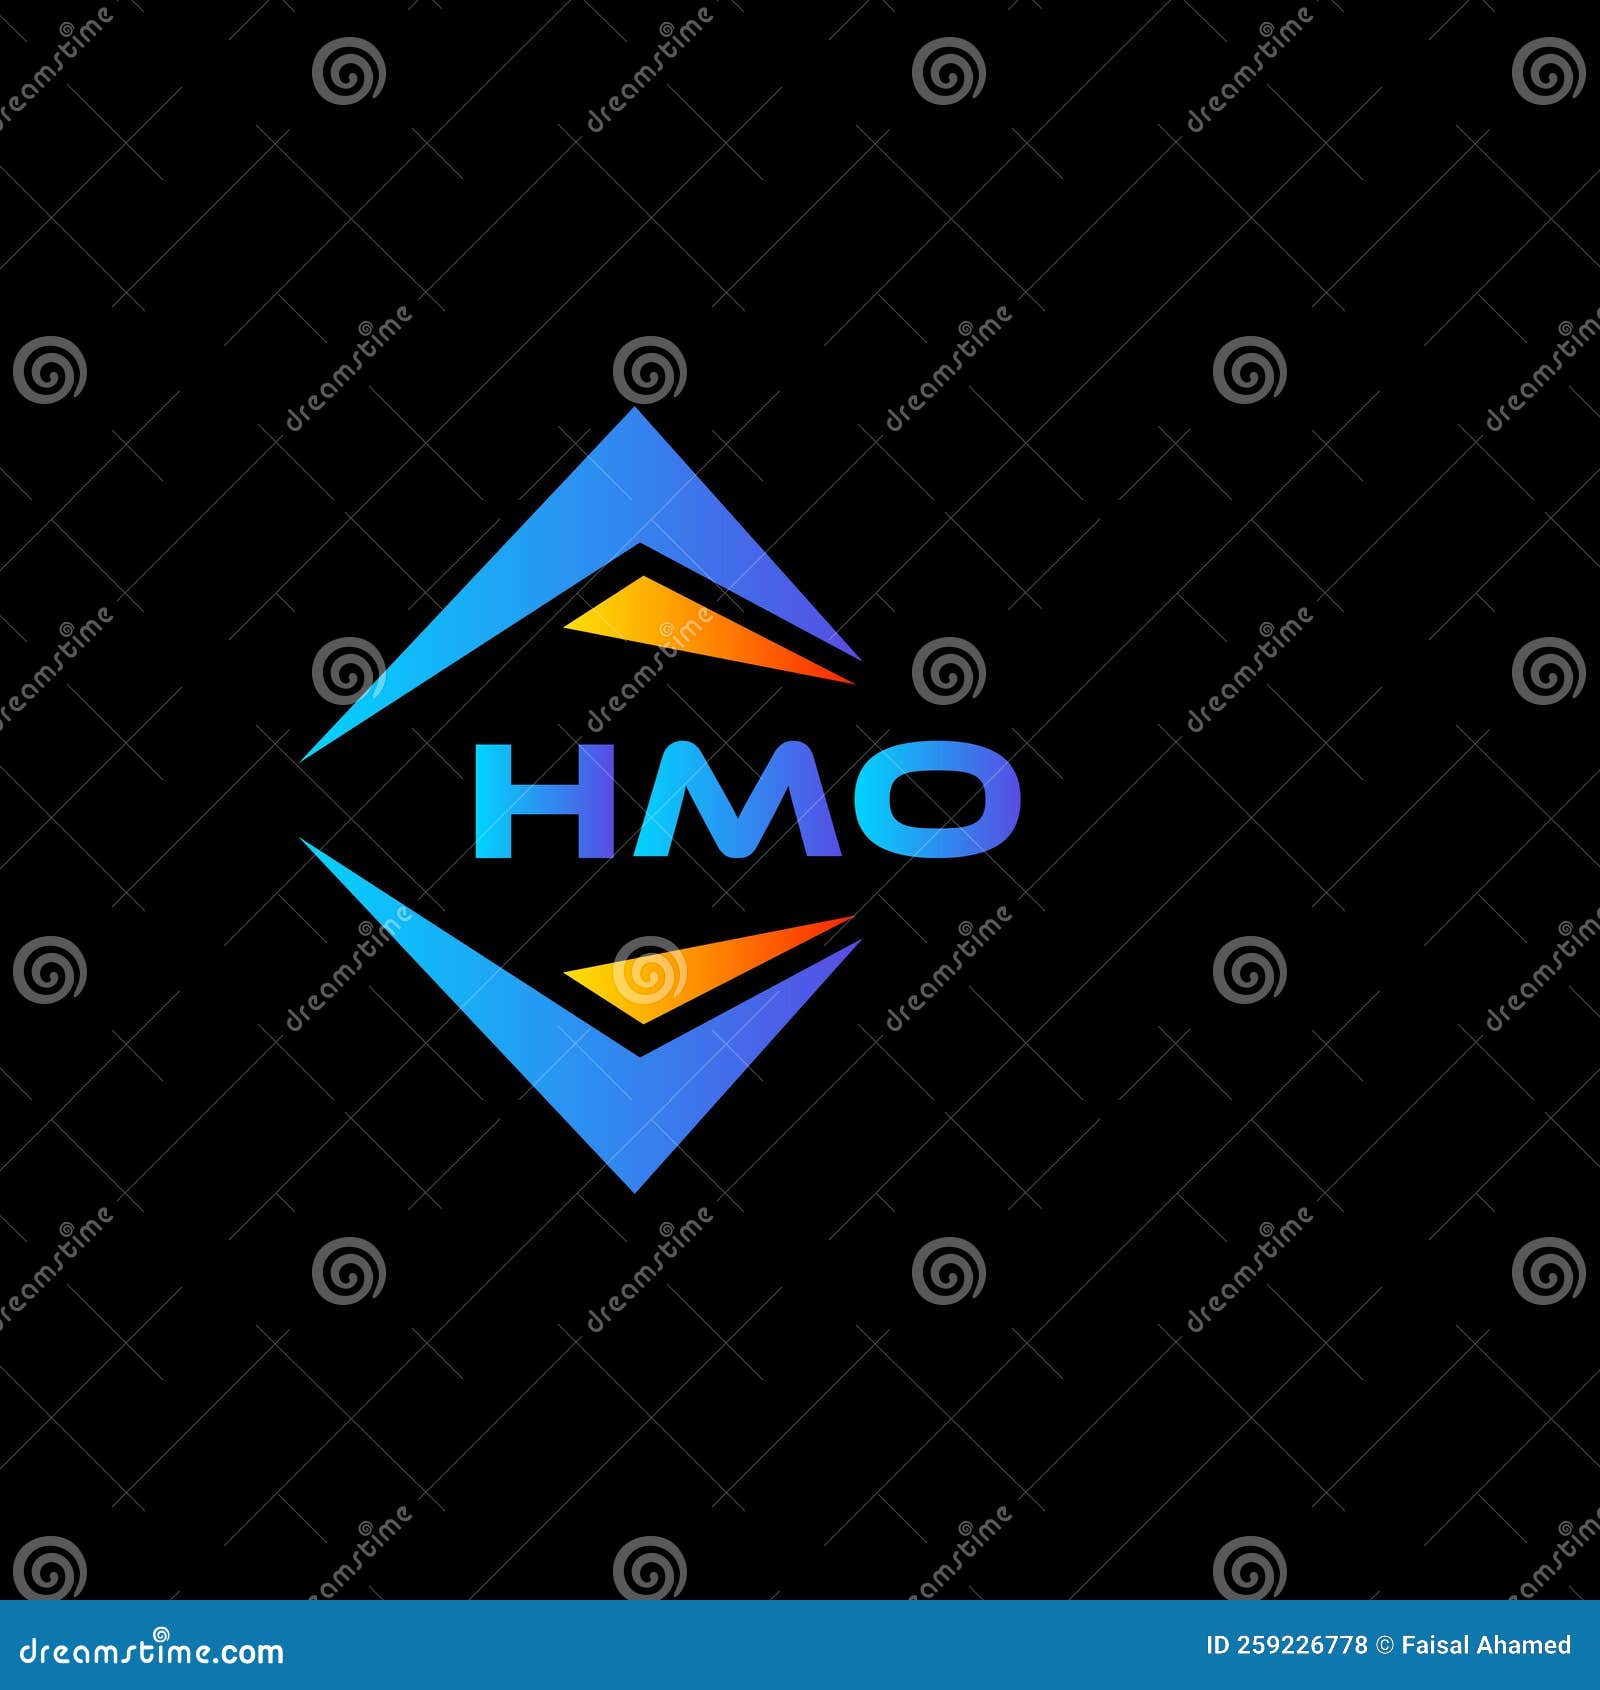 hmo abstract technology logo  on black background. hmo creative initials letter logo concept